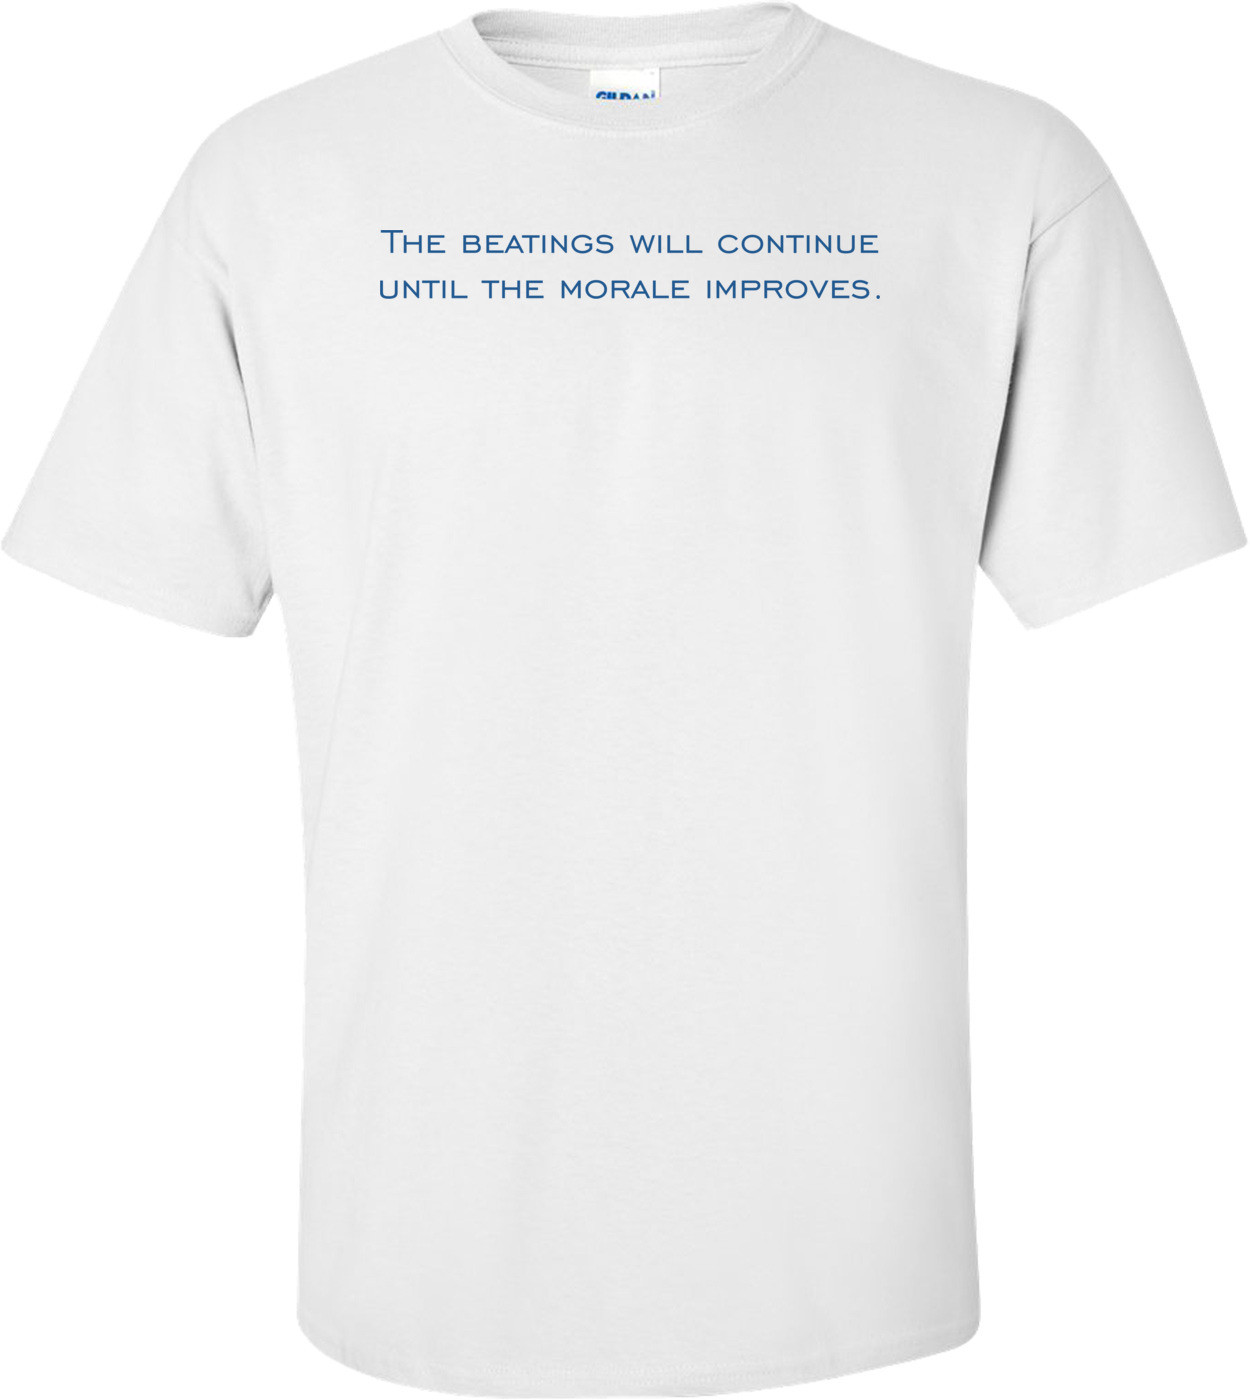 The beatings will continue until the morale improves. Shirt